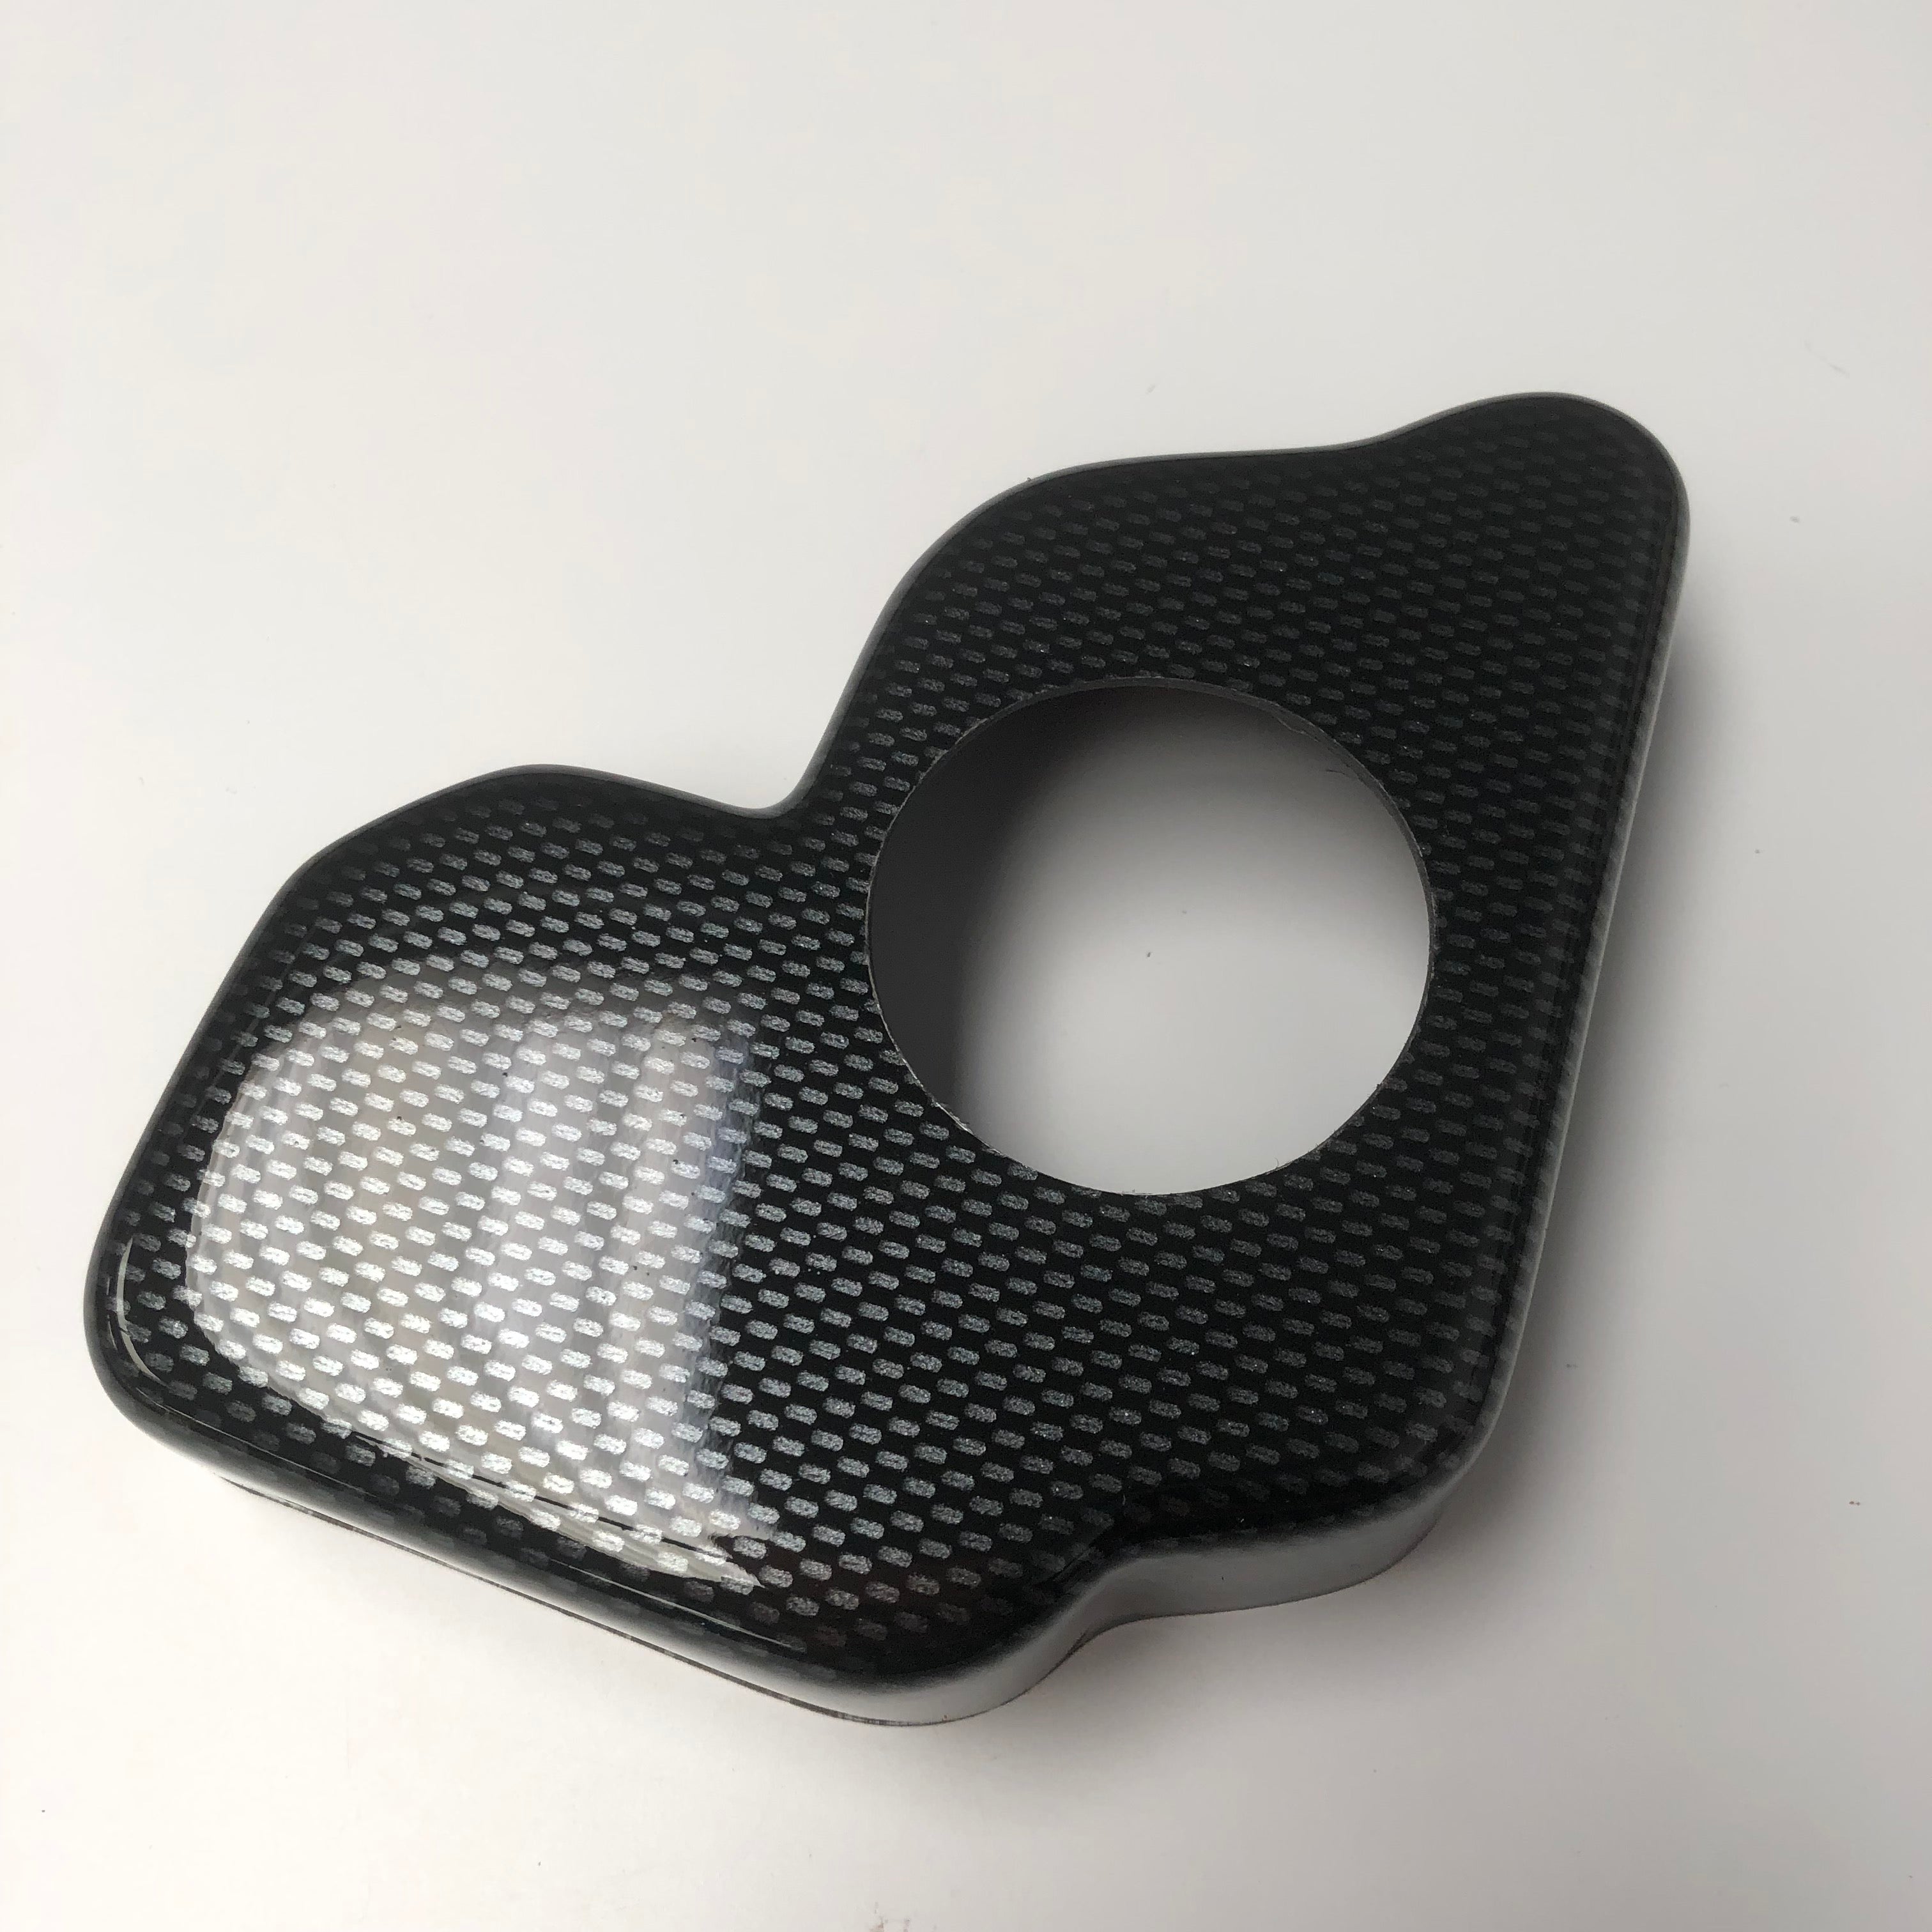 Proform PAS Reservoir Cover - Mk6 Ford Fiesta (Plastic Finishes)